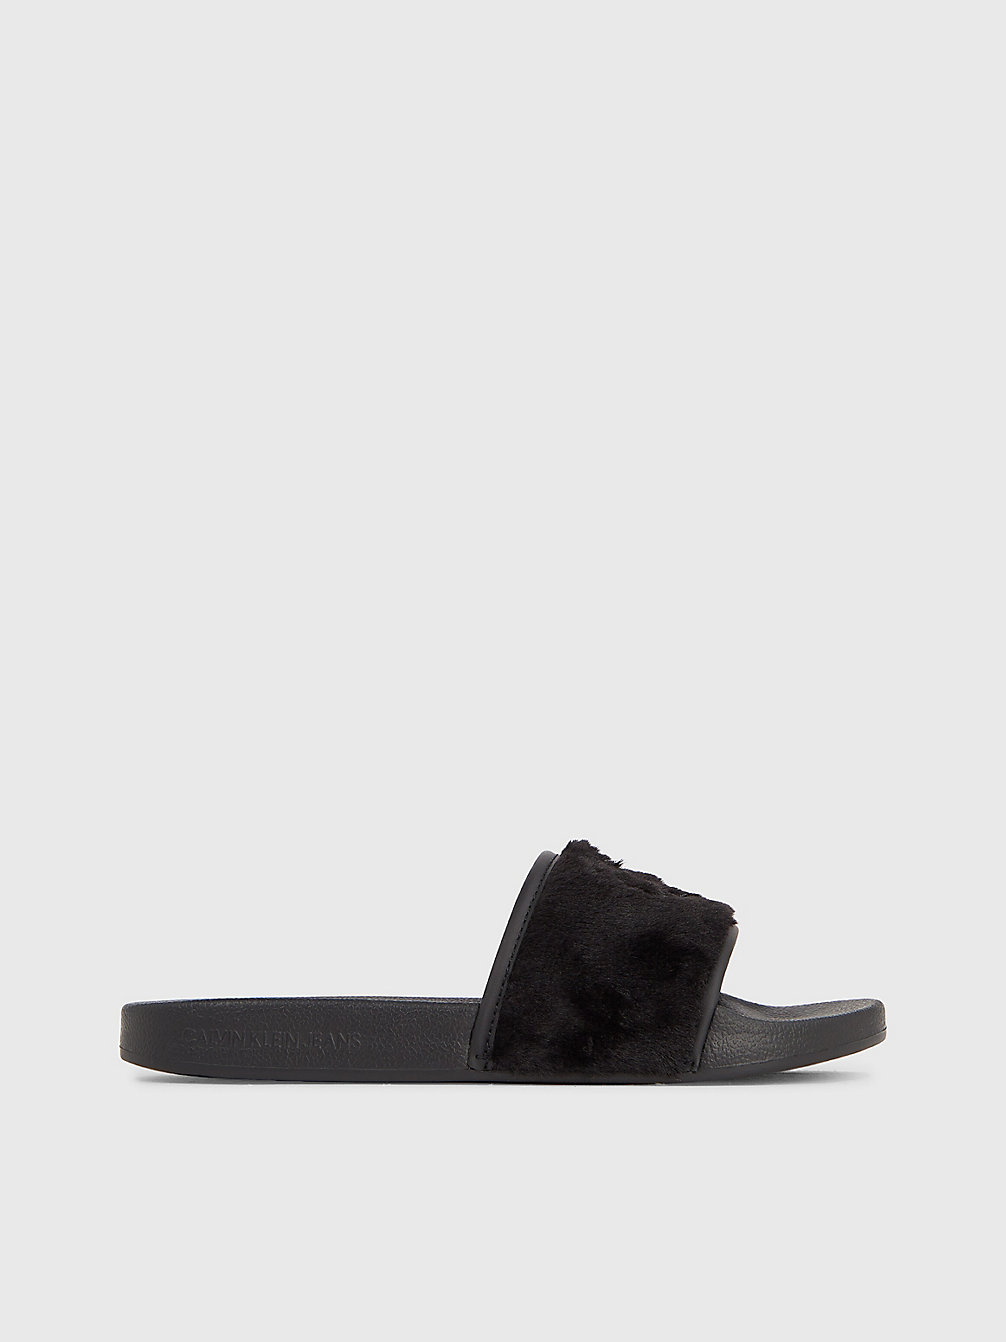 BLACK Recycled Faux Fur Sliders undefined women Calvin Klein